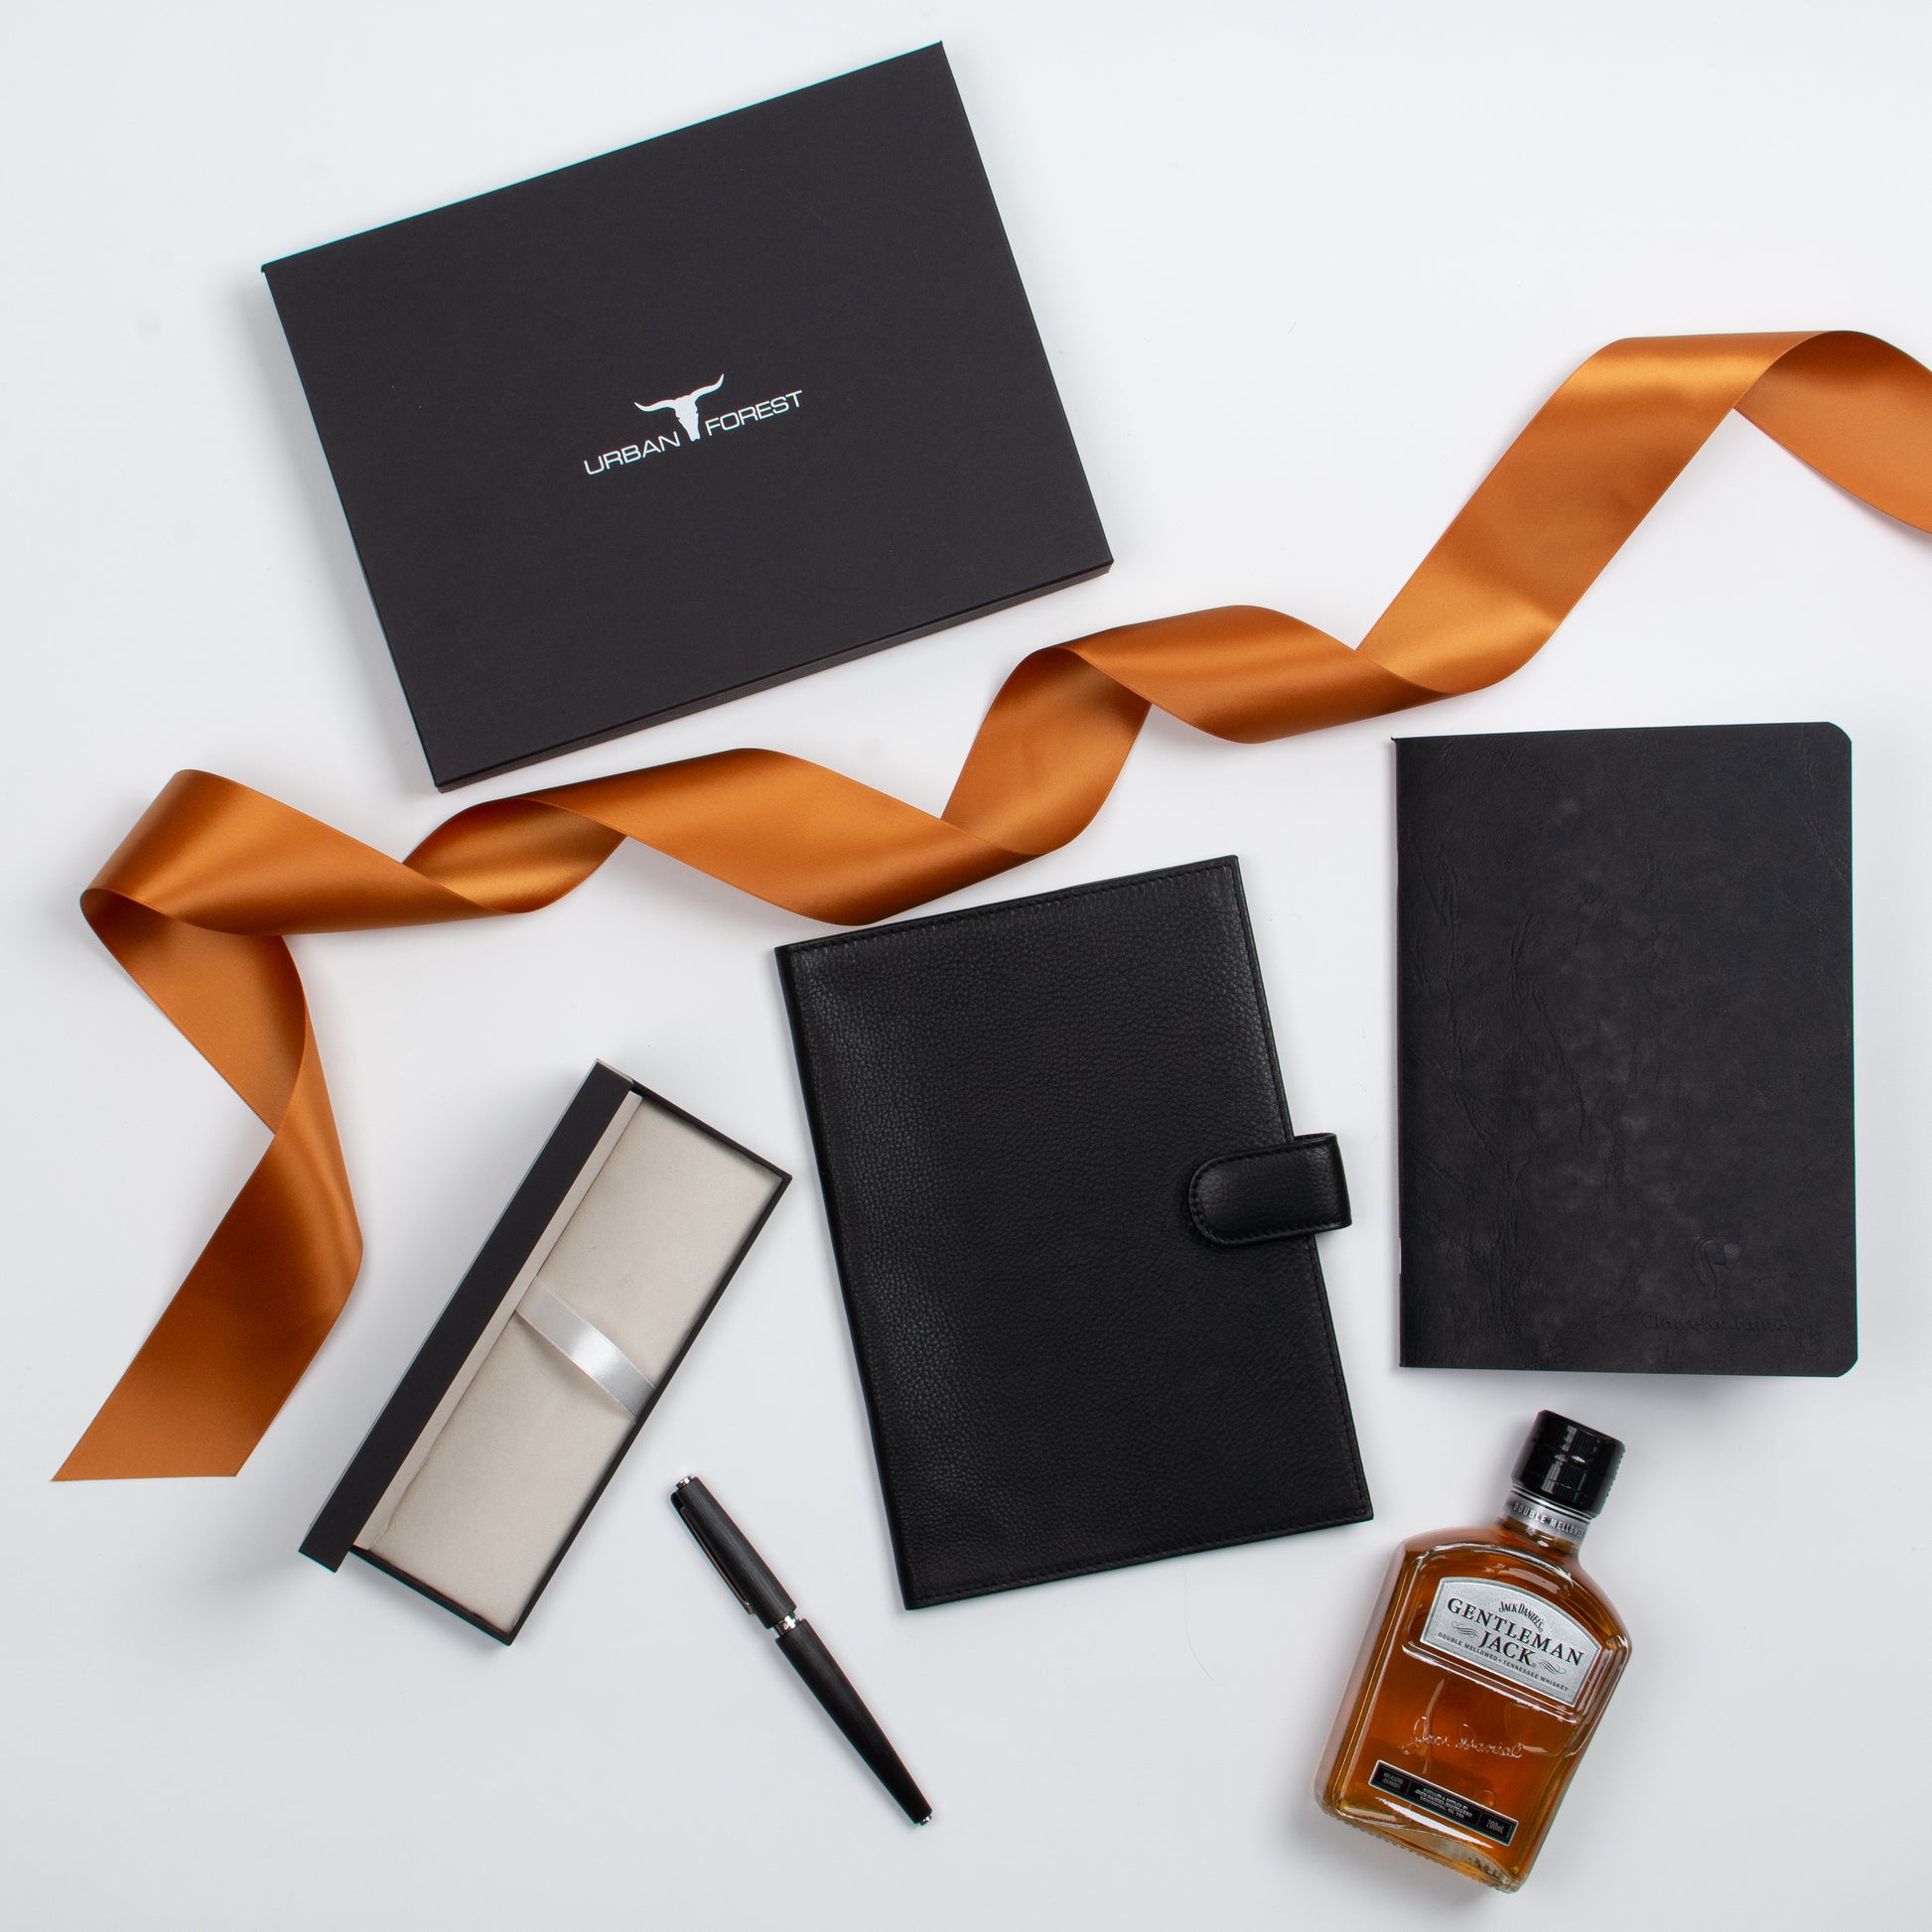 Featured products out of gift box are notebook, notebook cover, pen, whisky.